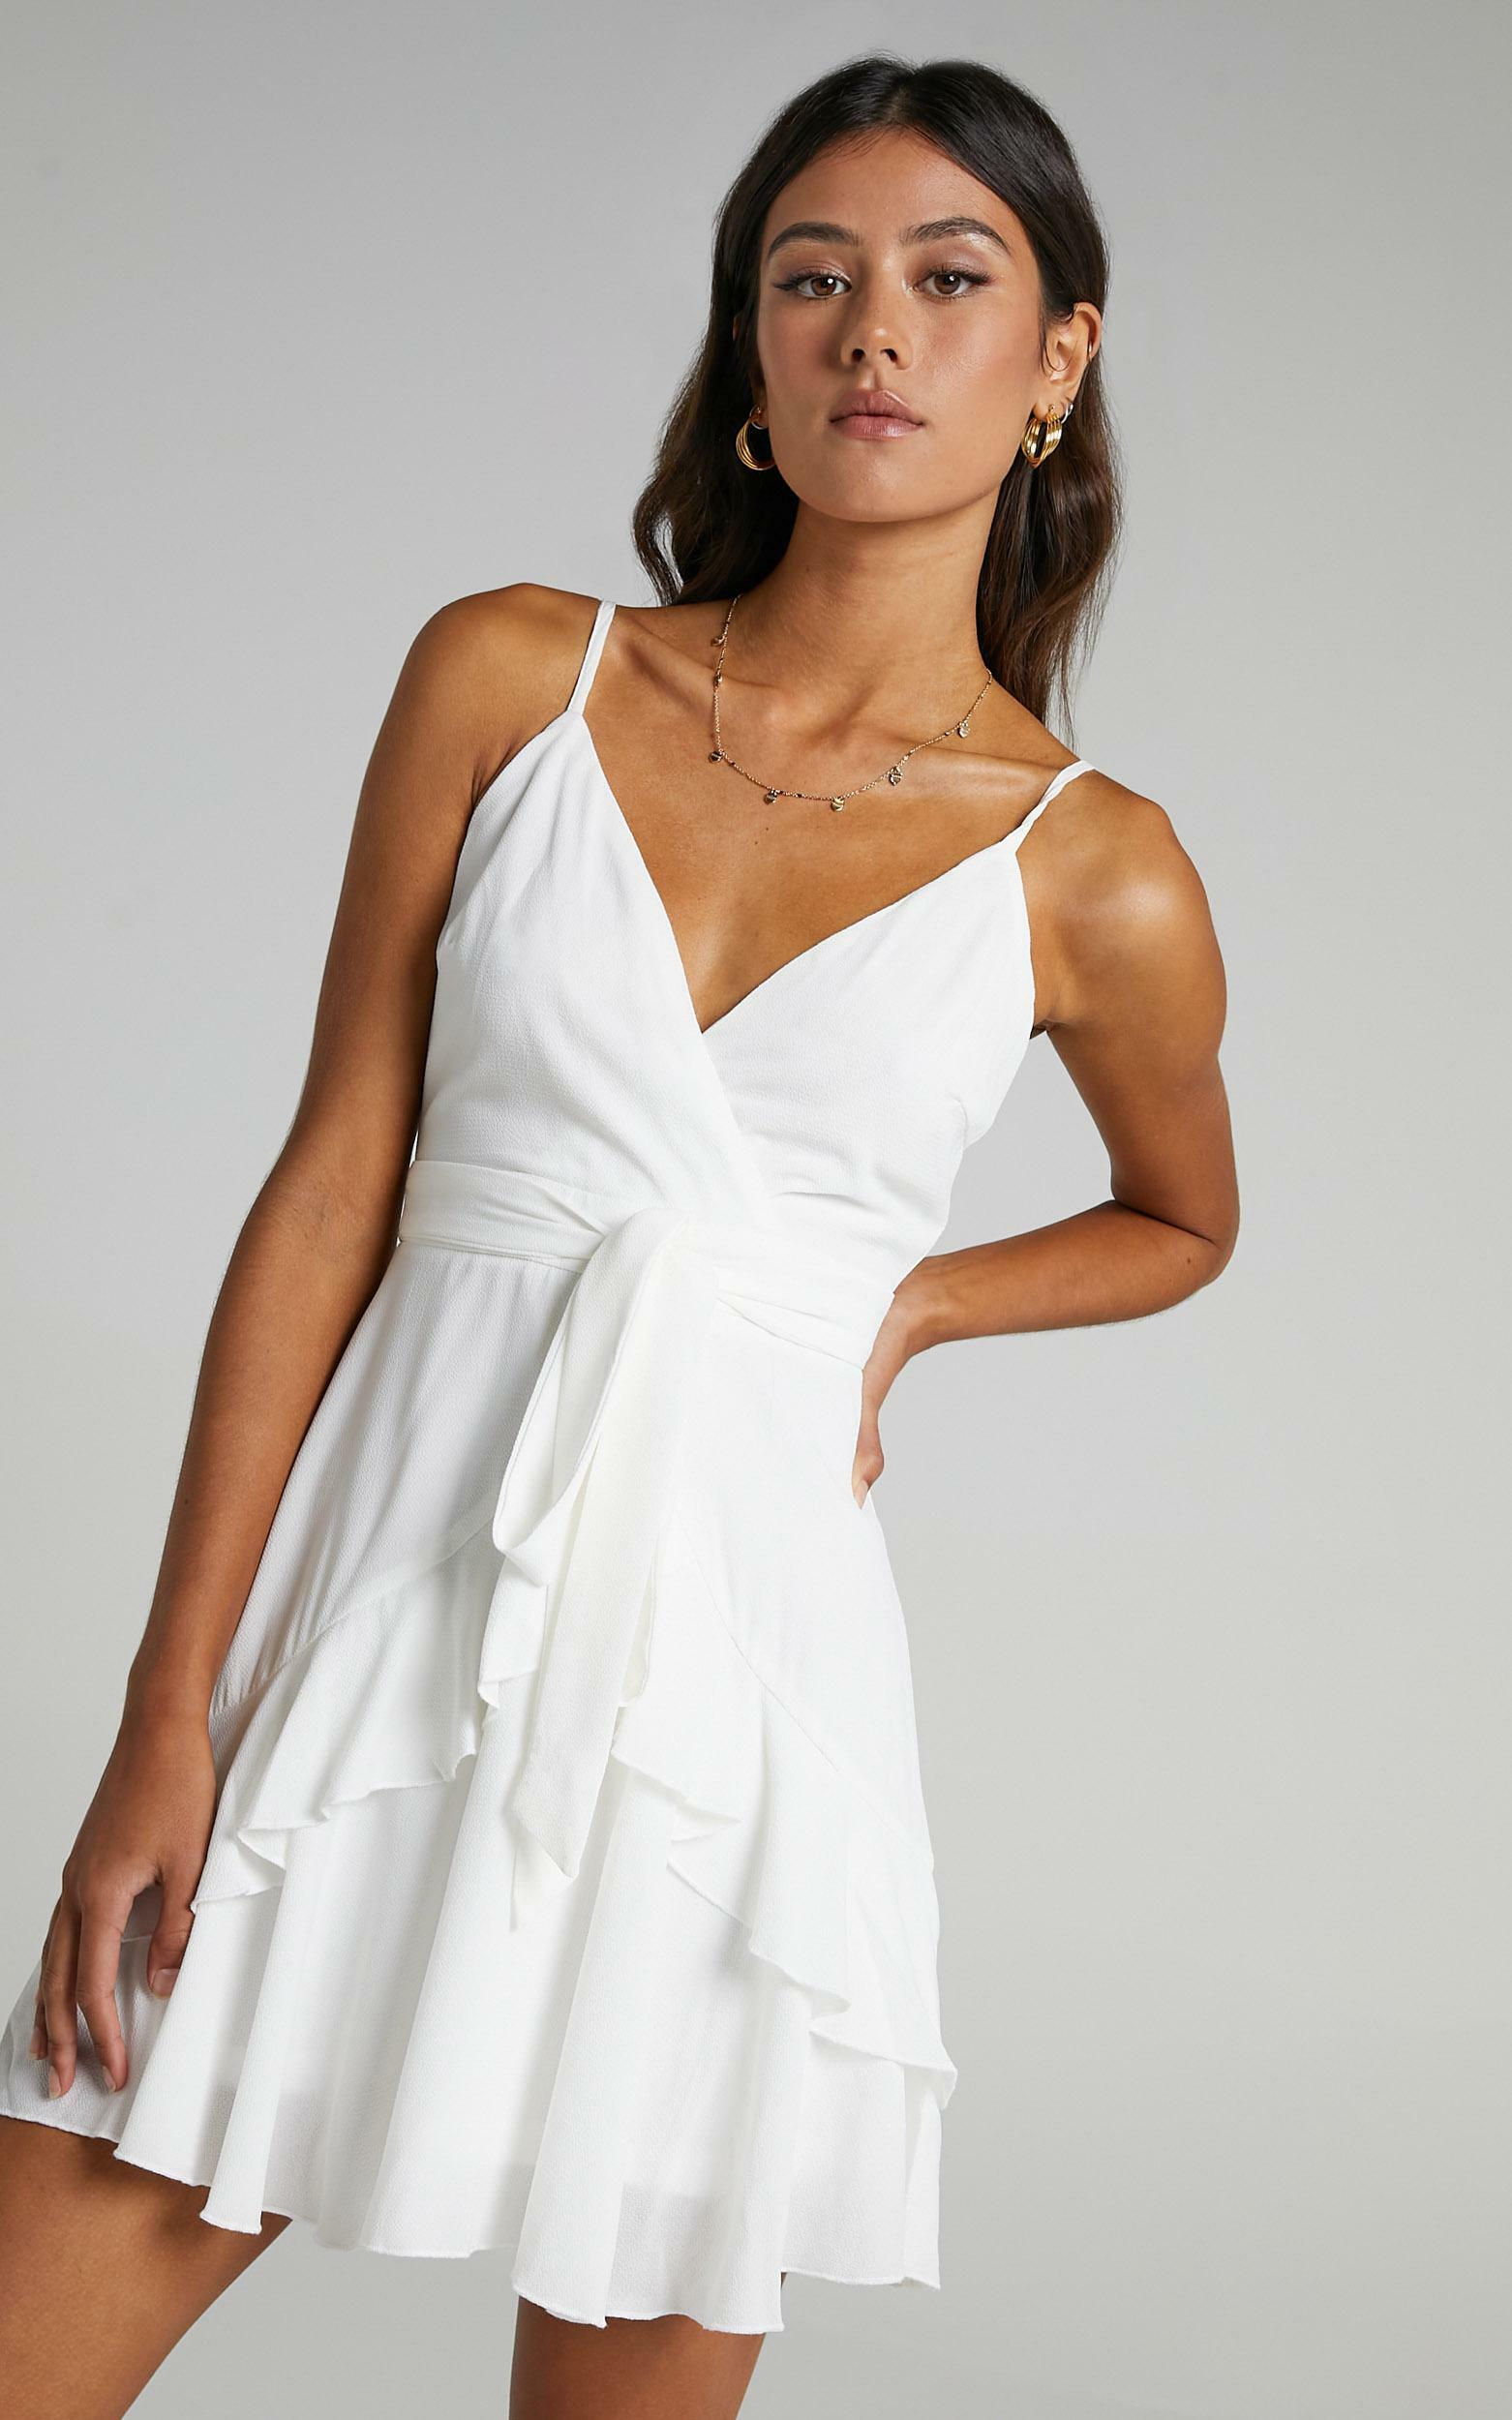 Feels Like Love Dress in White - 06, WHT6, hi-res image number null